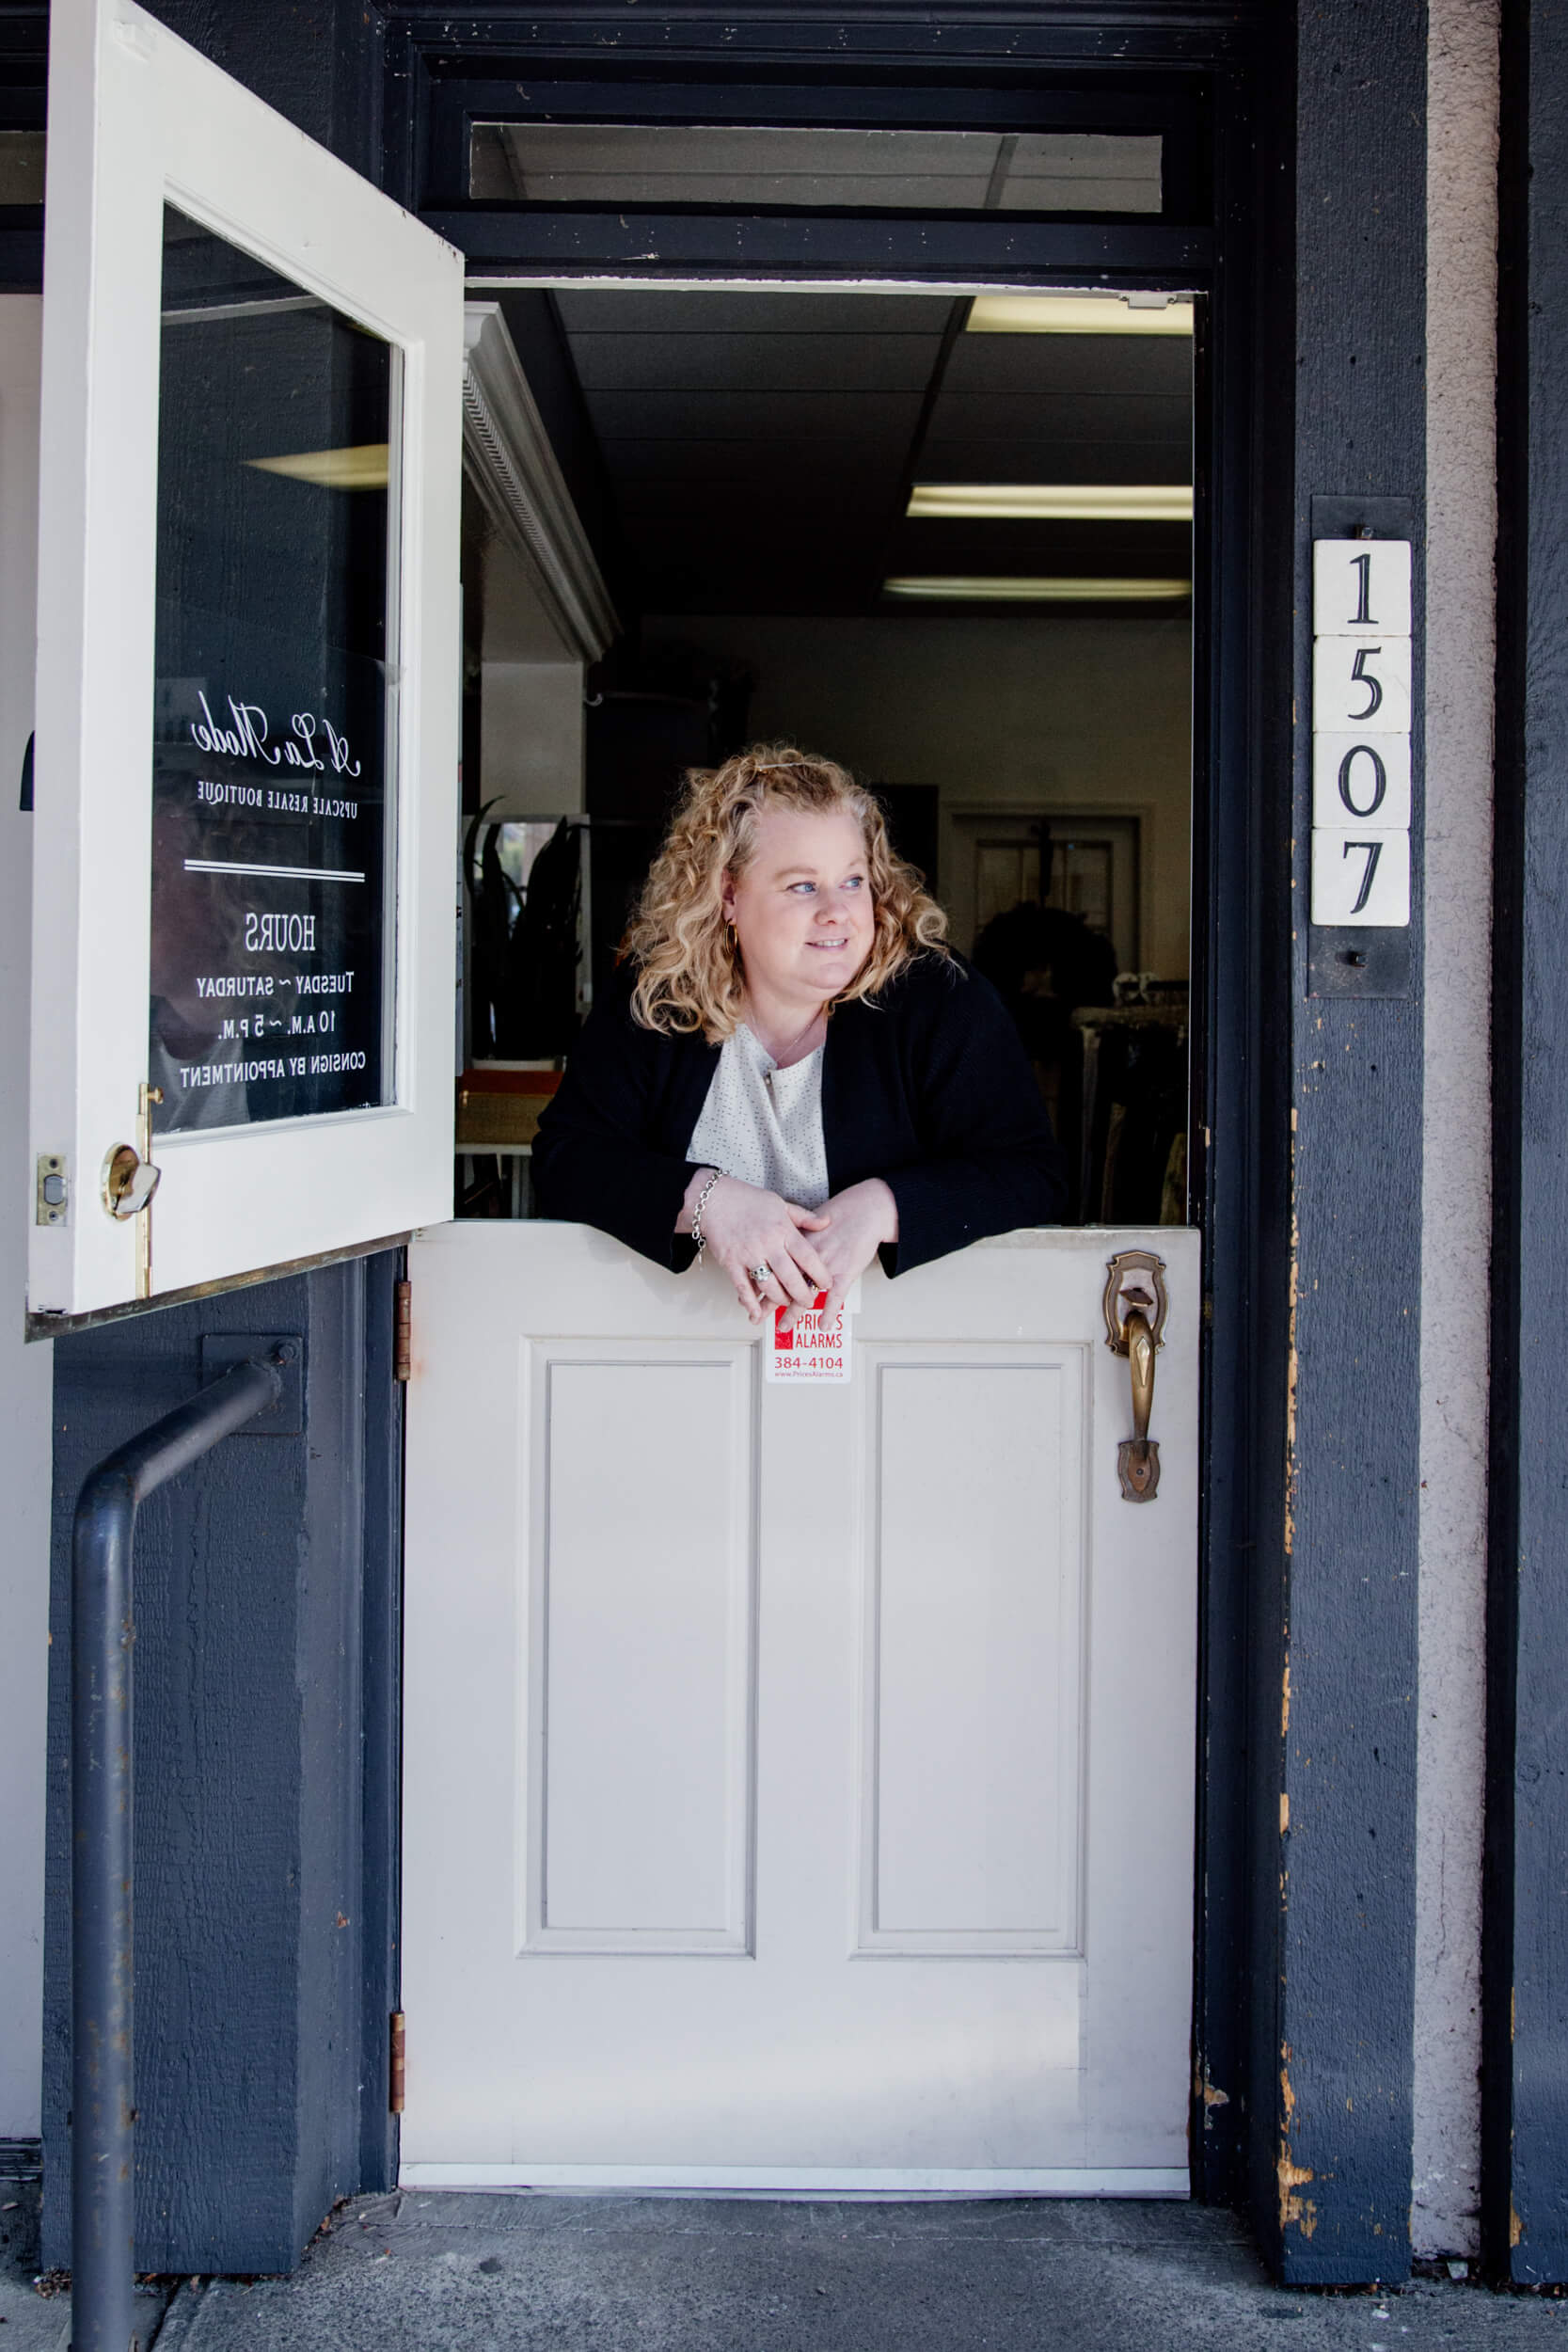 A shopowner leans on the doors at the front of her store.,